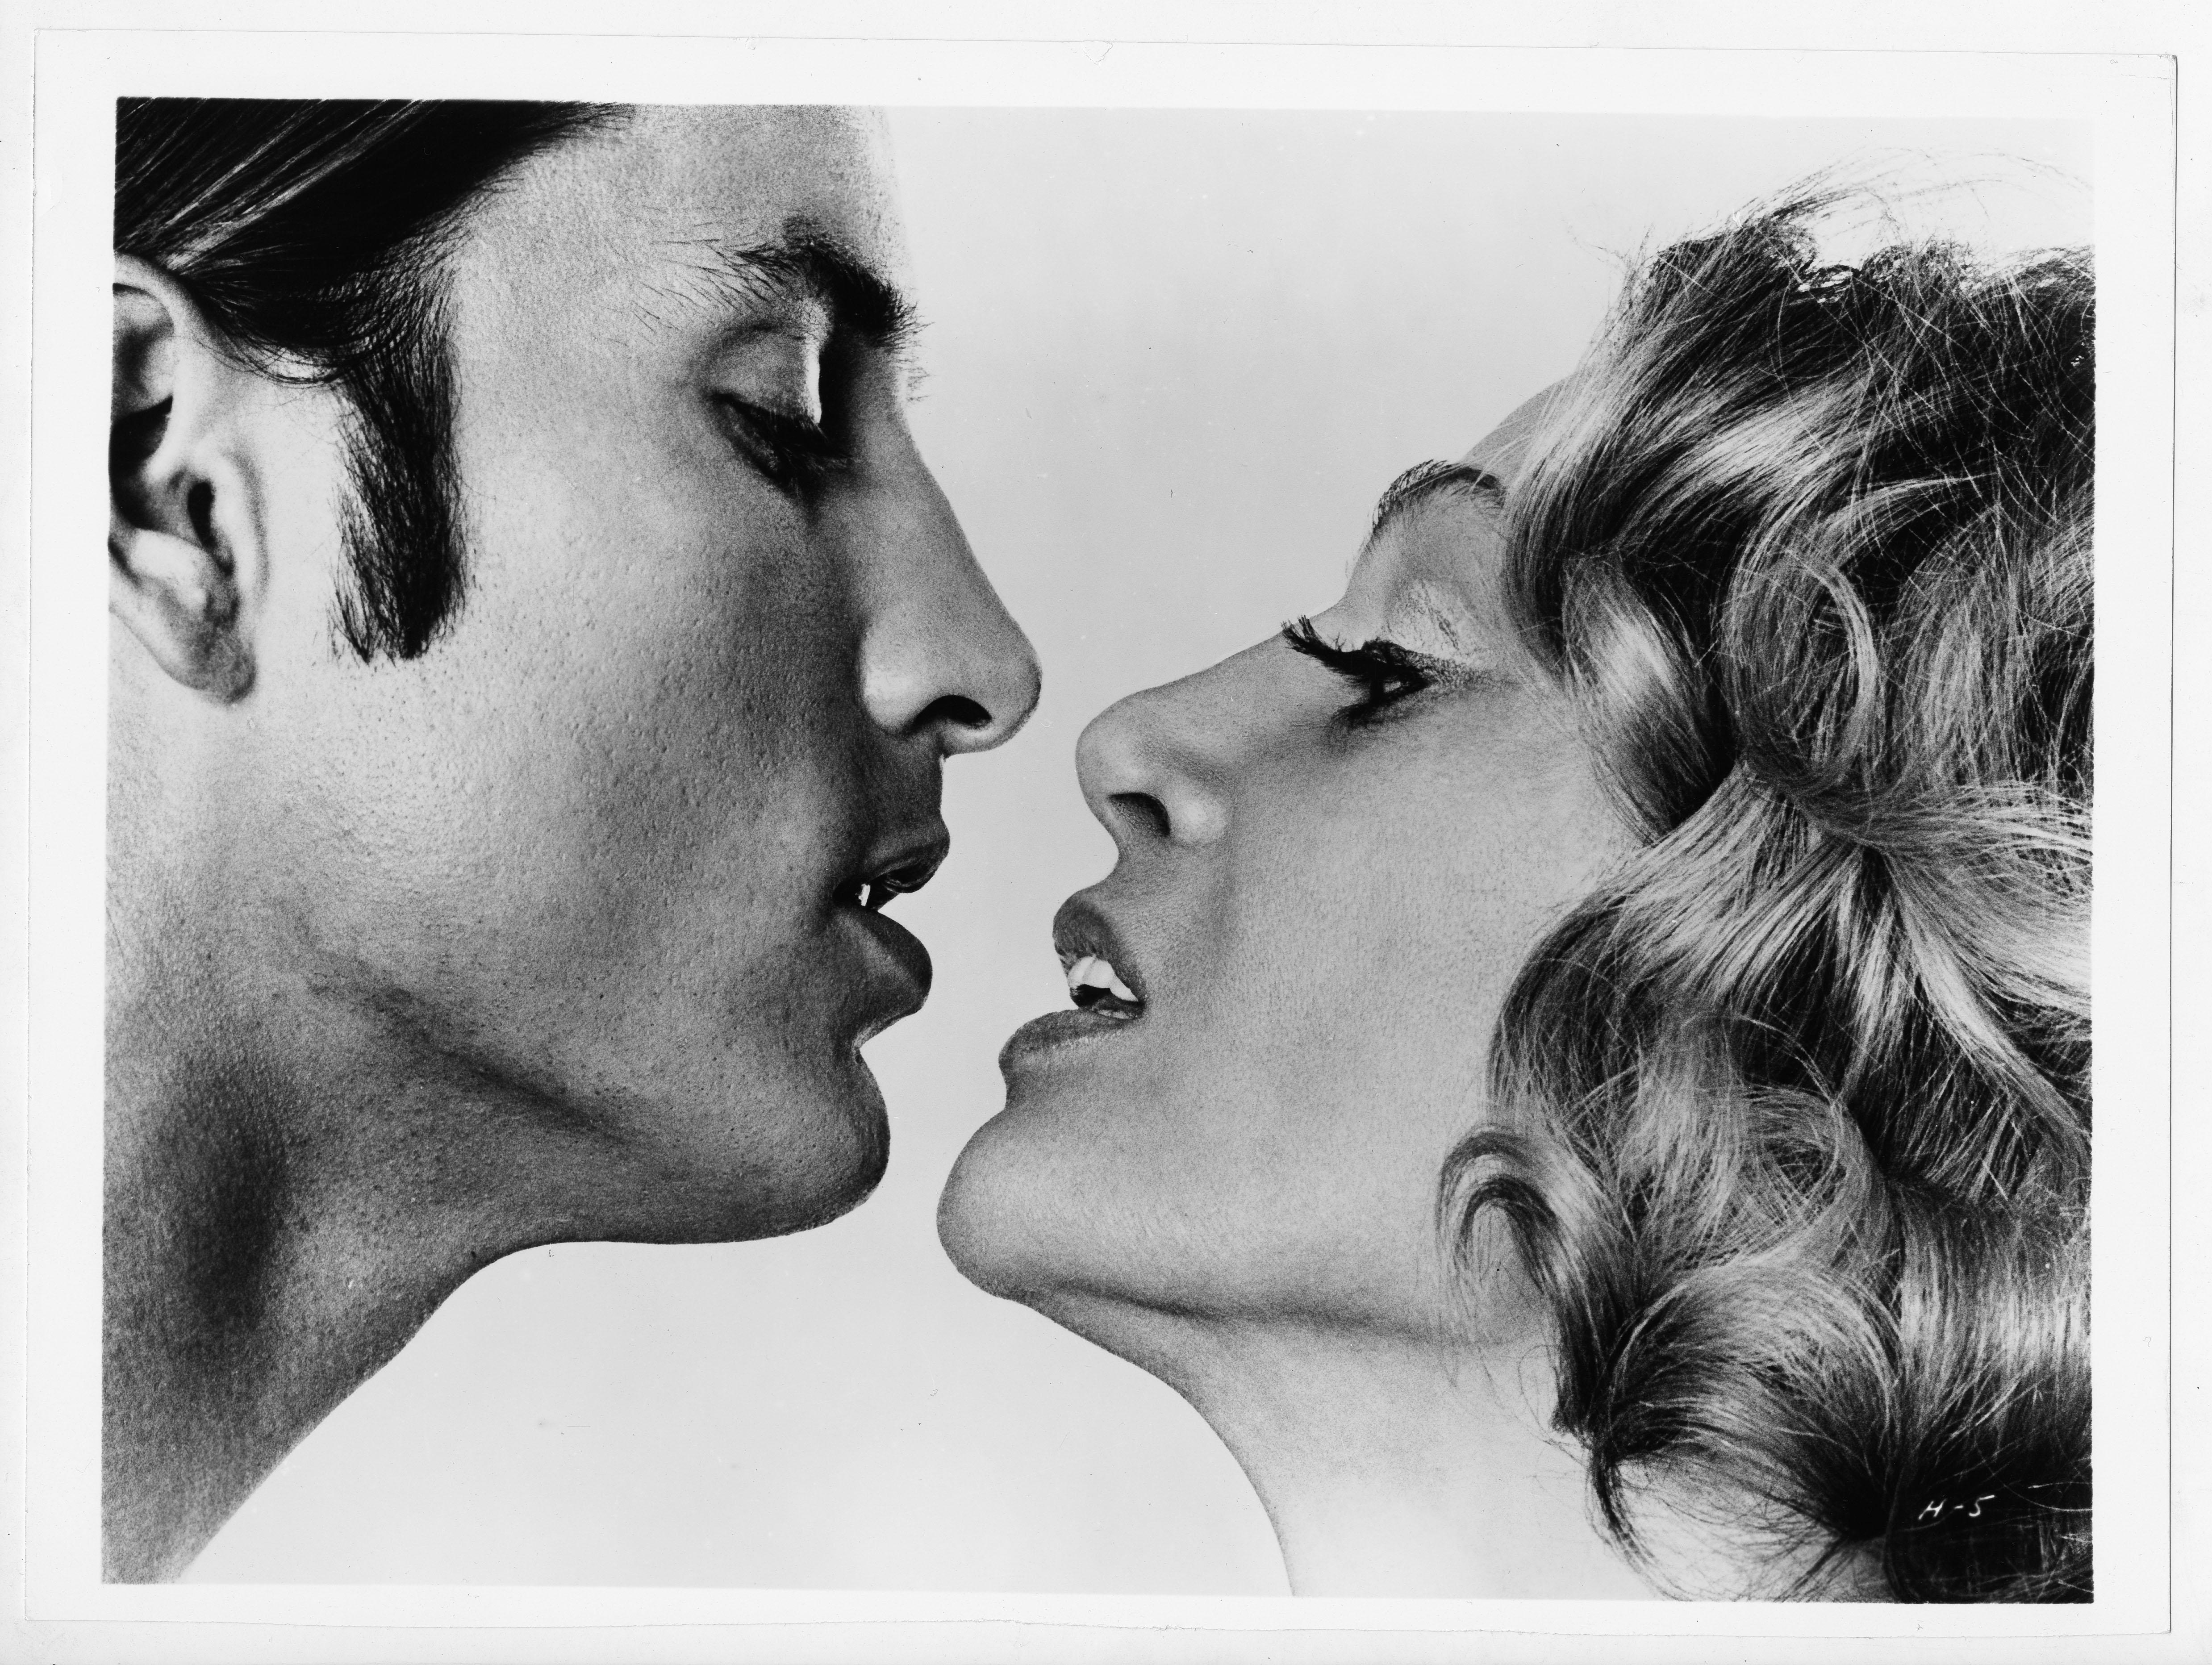 Jack Mitchell Black and White Photograph - Sylvia Miles and Joe Dallesandro in Andy Warhol's 'Heat', March 1972.